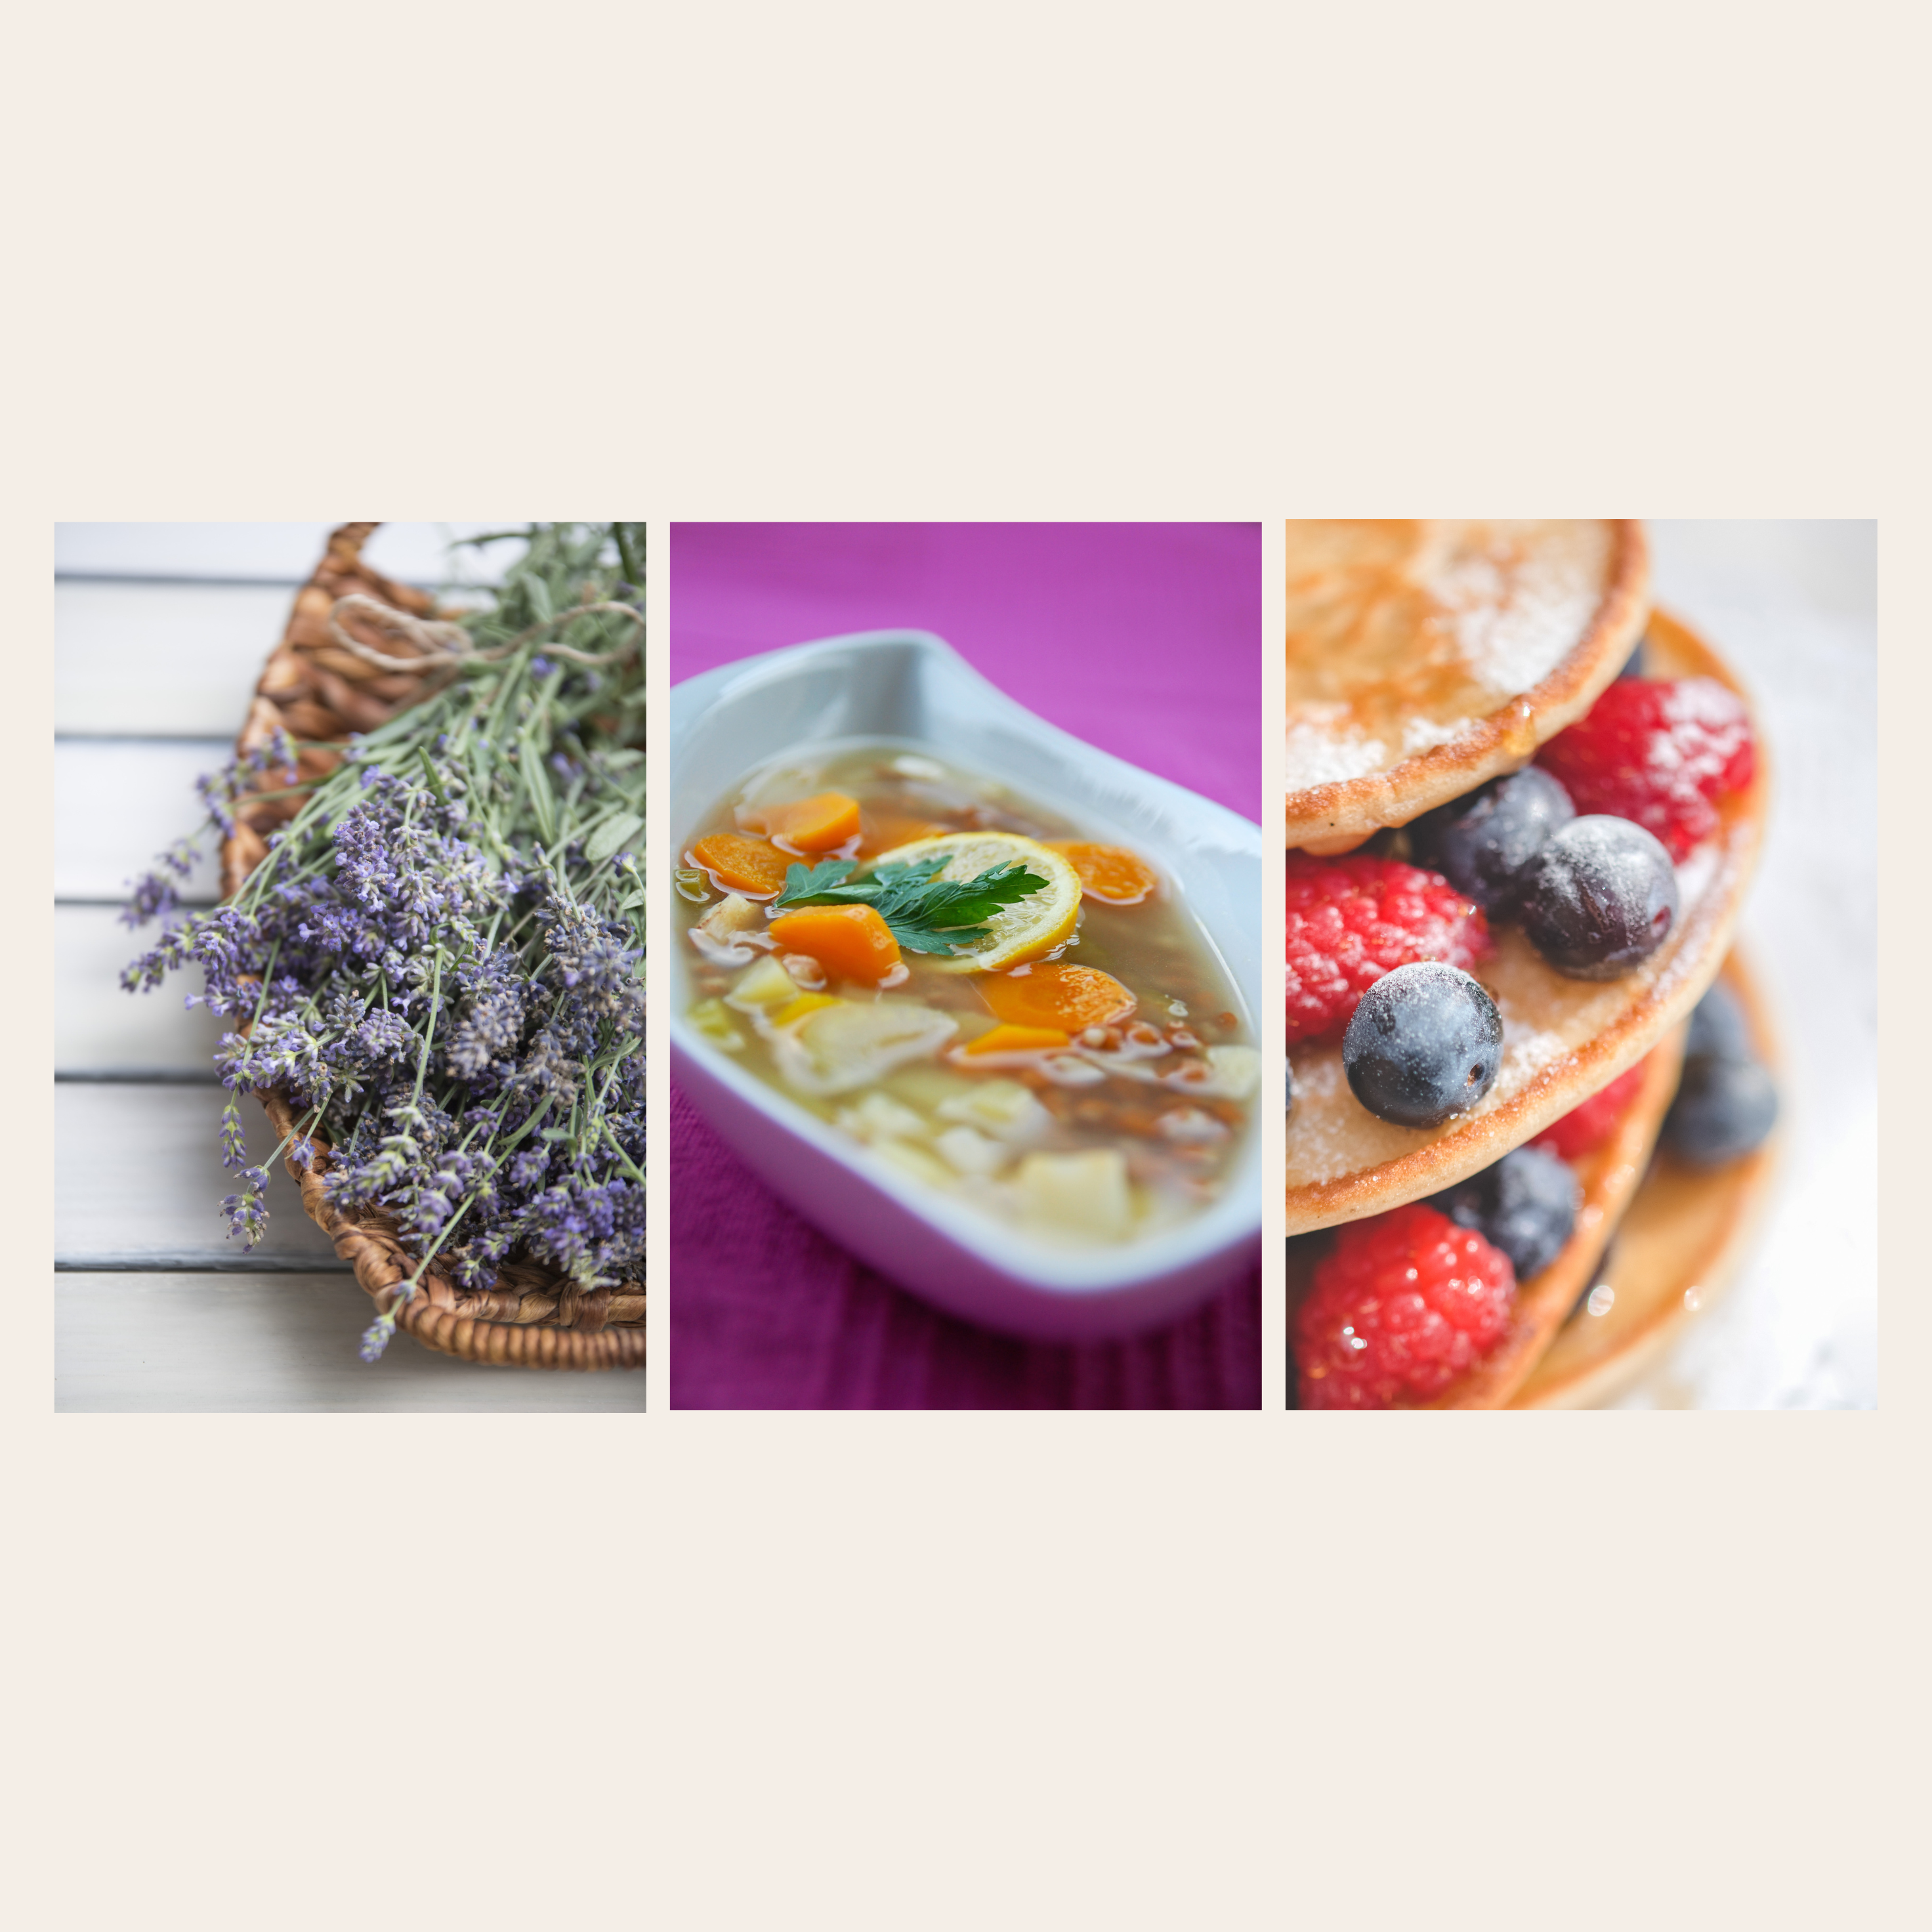 lavendel, suppe, pancakes, obst